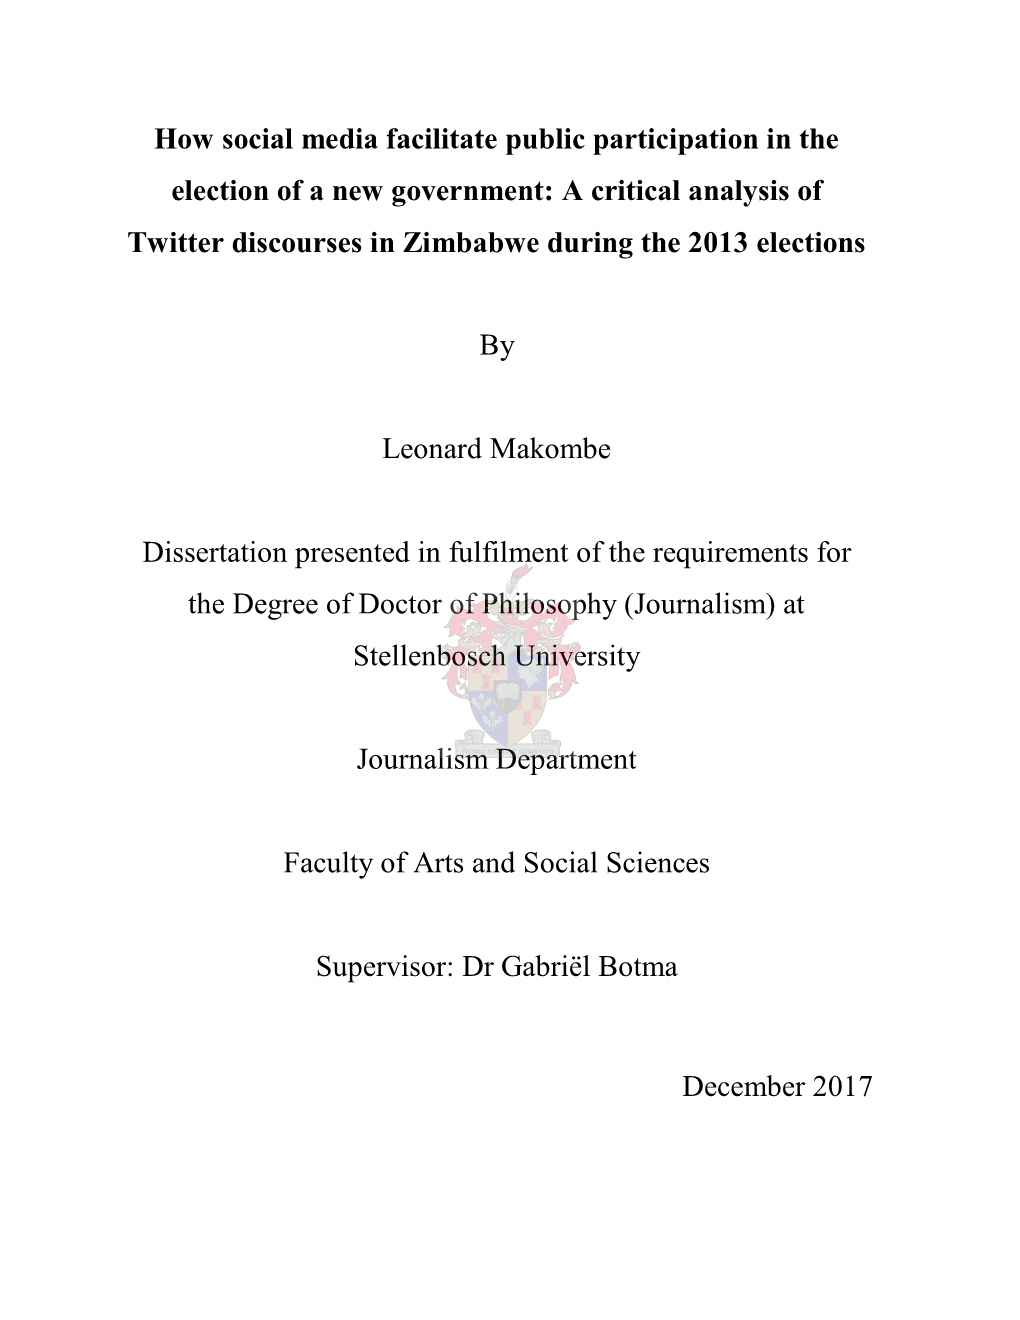 How Social Media Facilitate Public Participation in the Election of a New Government: a Critical Analysis of Twitter Discourses in Zimbabwe During the 2013 Elections